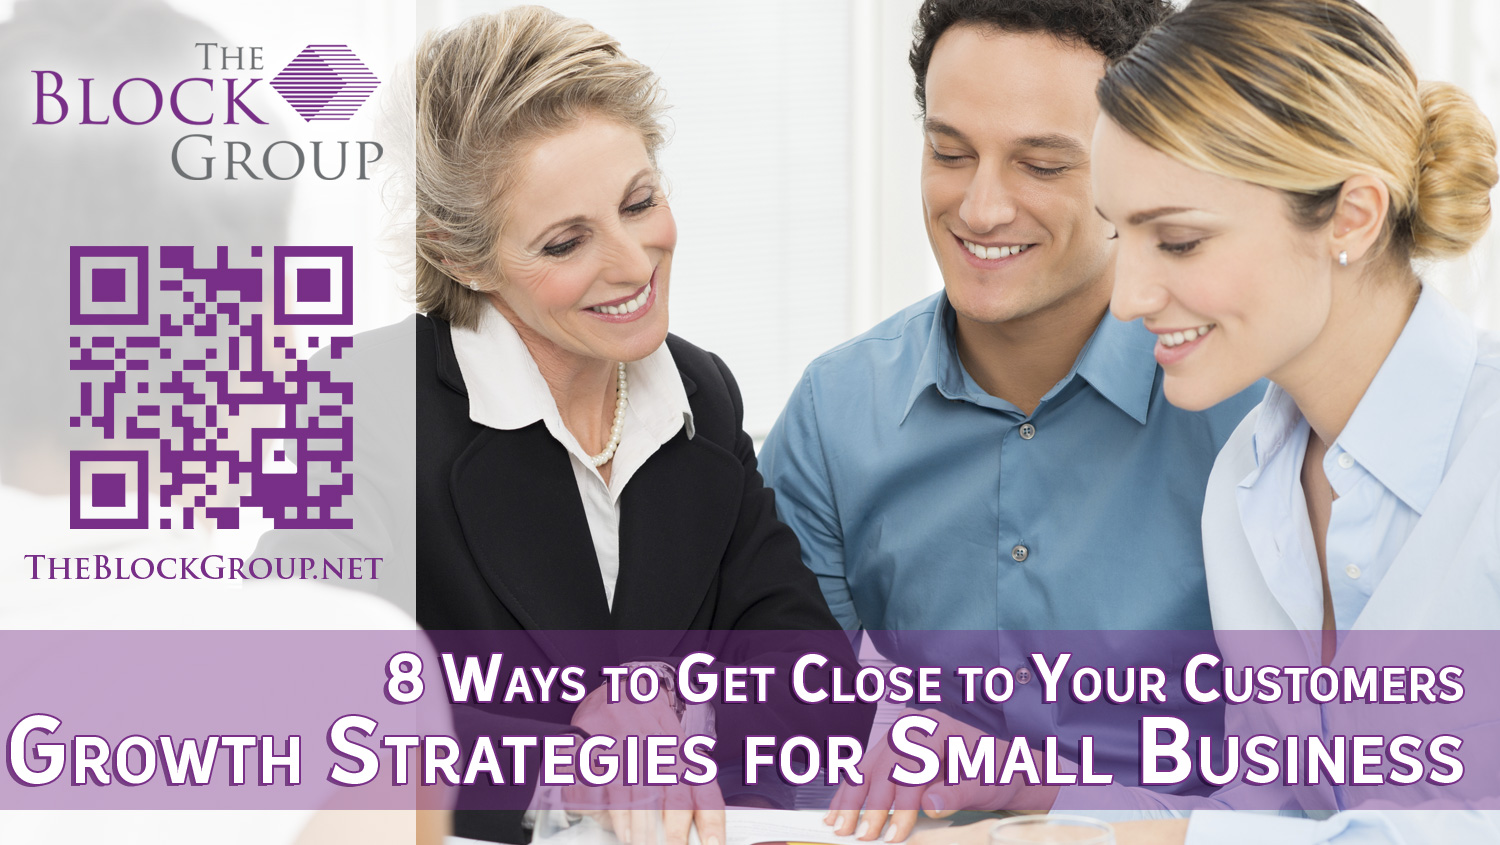 07-Financial-strategies-for-small-business